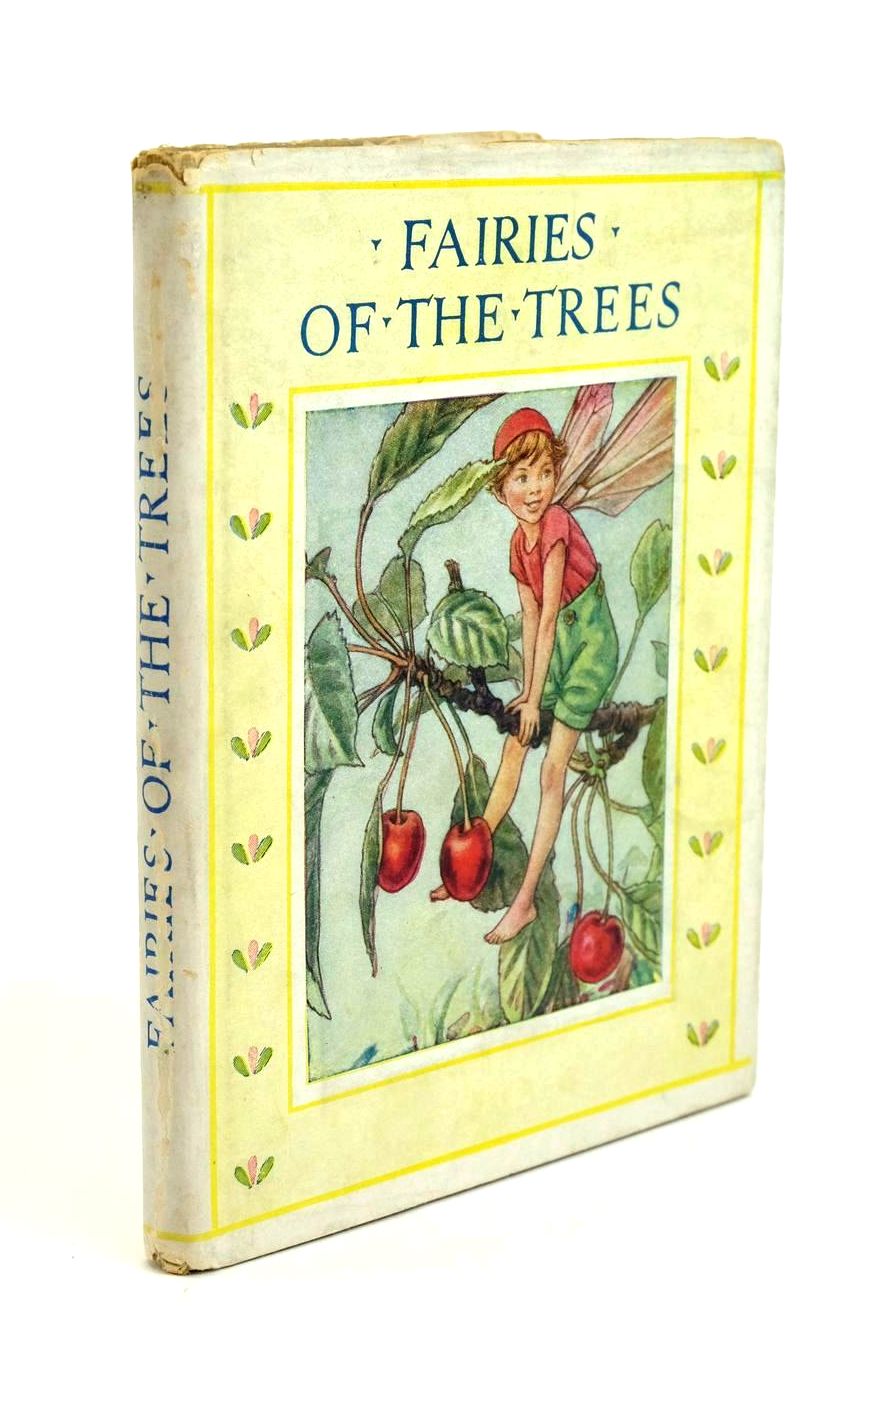 Photo of FAIRIES OF THE TREES written by Barker, Cicely Mary illustrated by Barker, Cicely Mary published by Blackie & Son Ltd. (STOCK CODE: 1321681)  for sale by Stella & Rose's Books